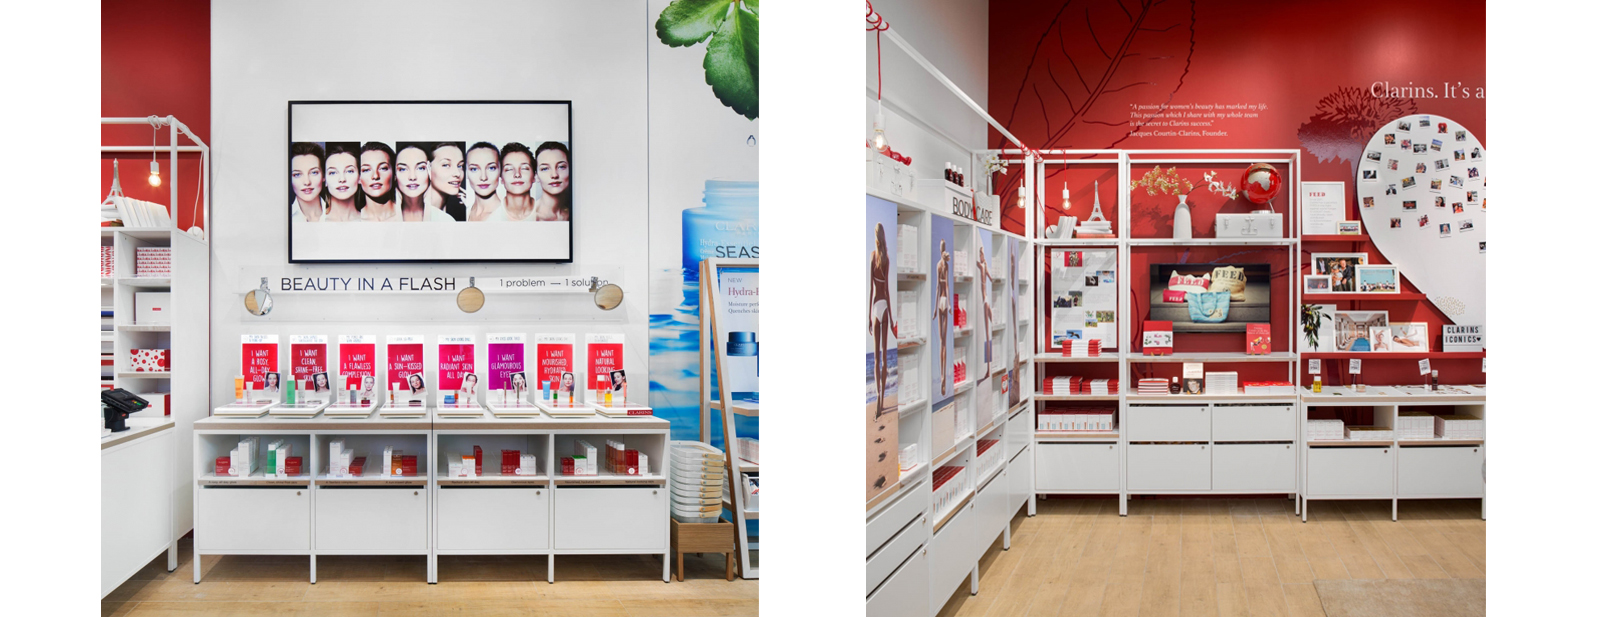 Clarins Flagship Store